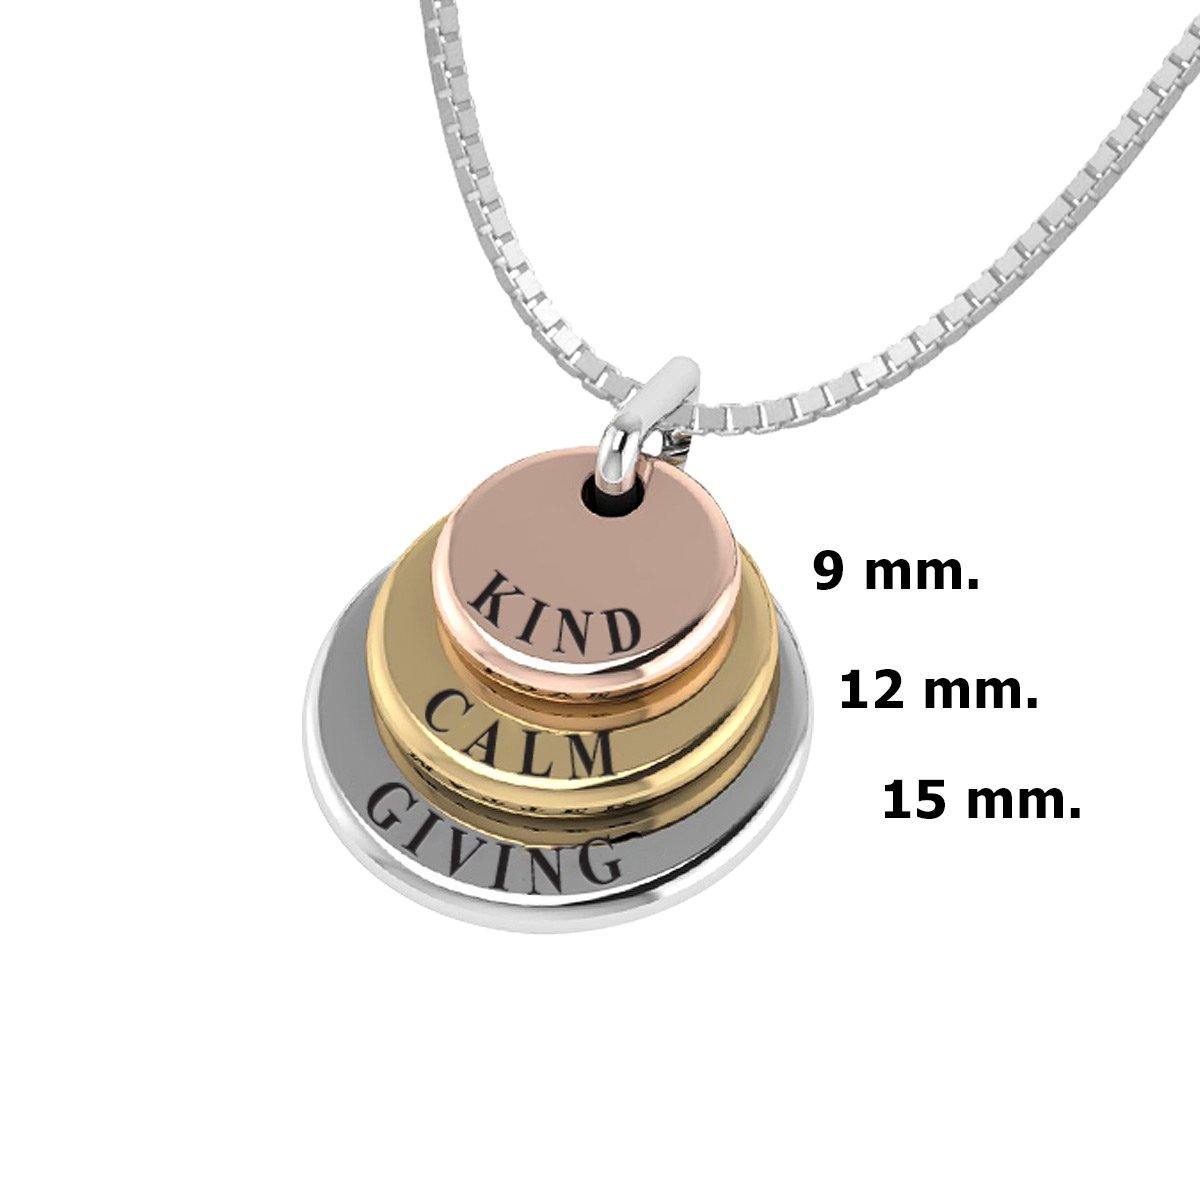 3 Words That Matter Triple Round Yellow Gold, Rose Gold and Silver Charm - Jewelry